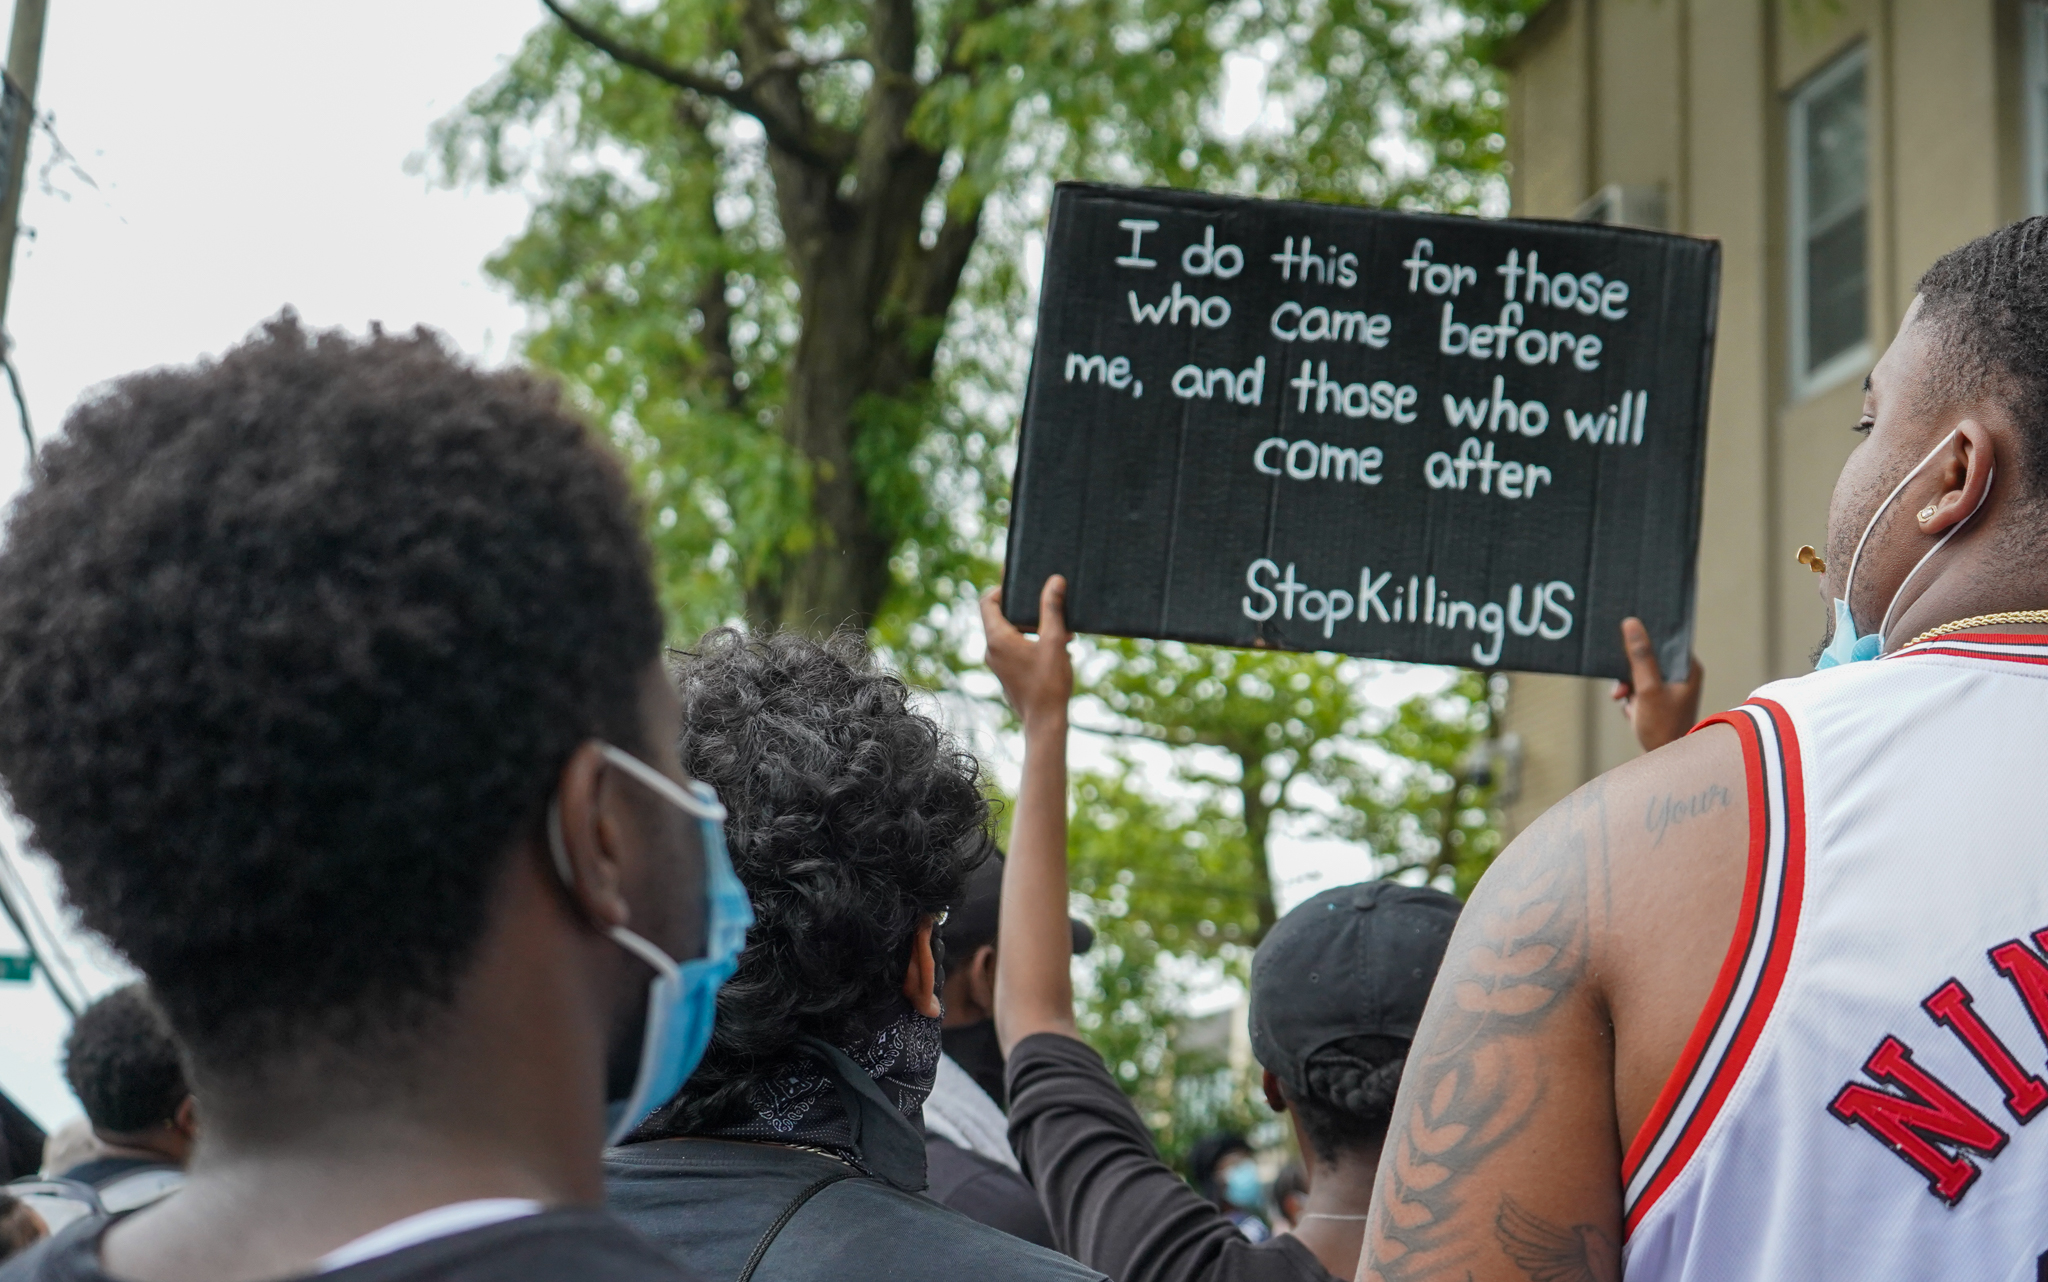 Demonstrators held signs to bring awareness to police brutality in Staten Island and around the United States. June 5, 2020 in New Dorp. (Staten Island Advance/ Alexandra Salmieri)